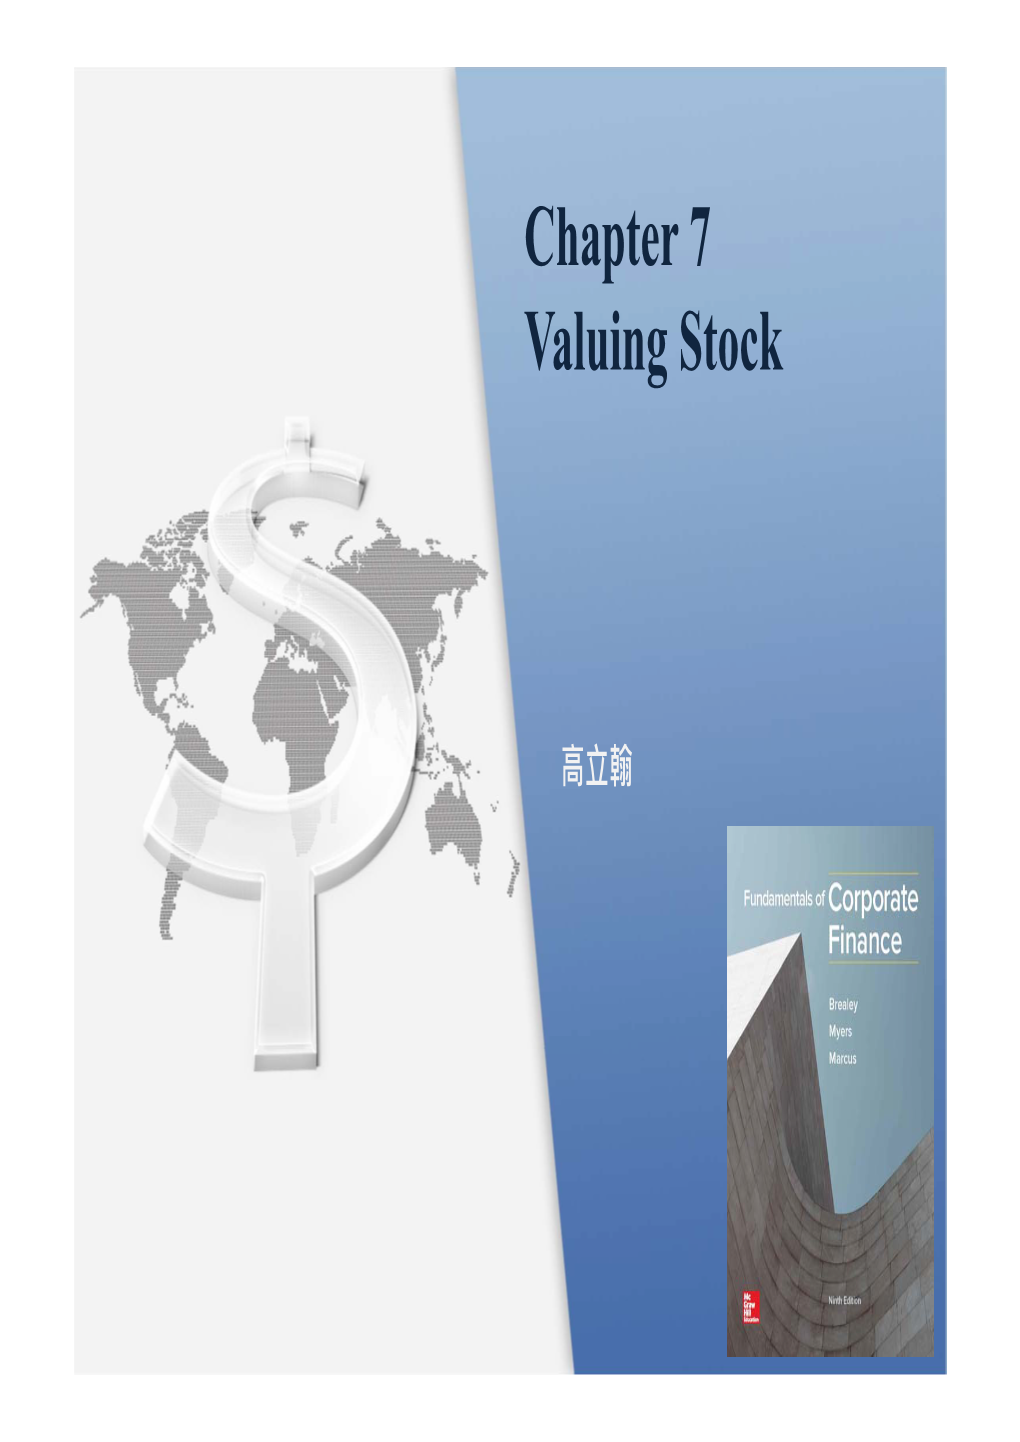 Chapter 7 Valuing Stock